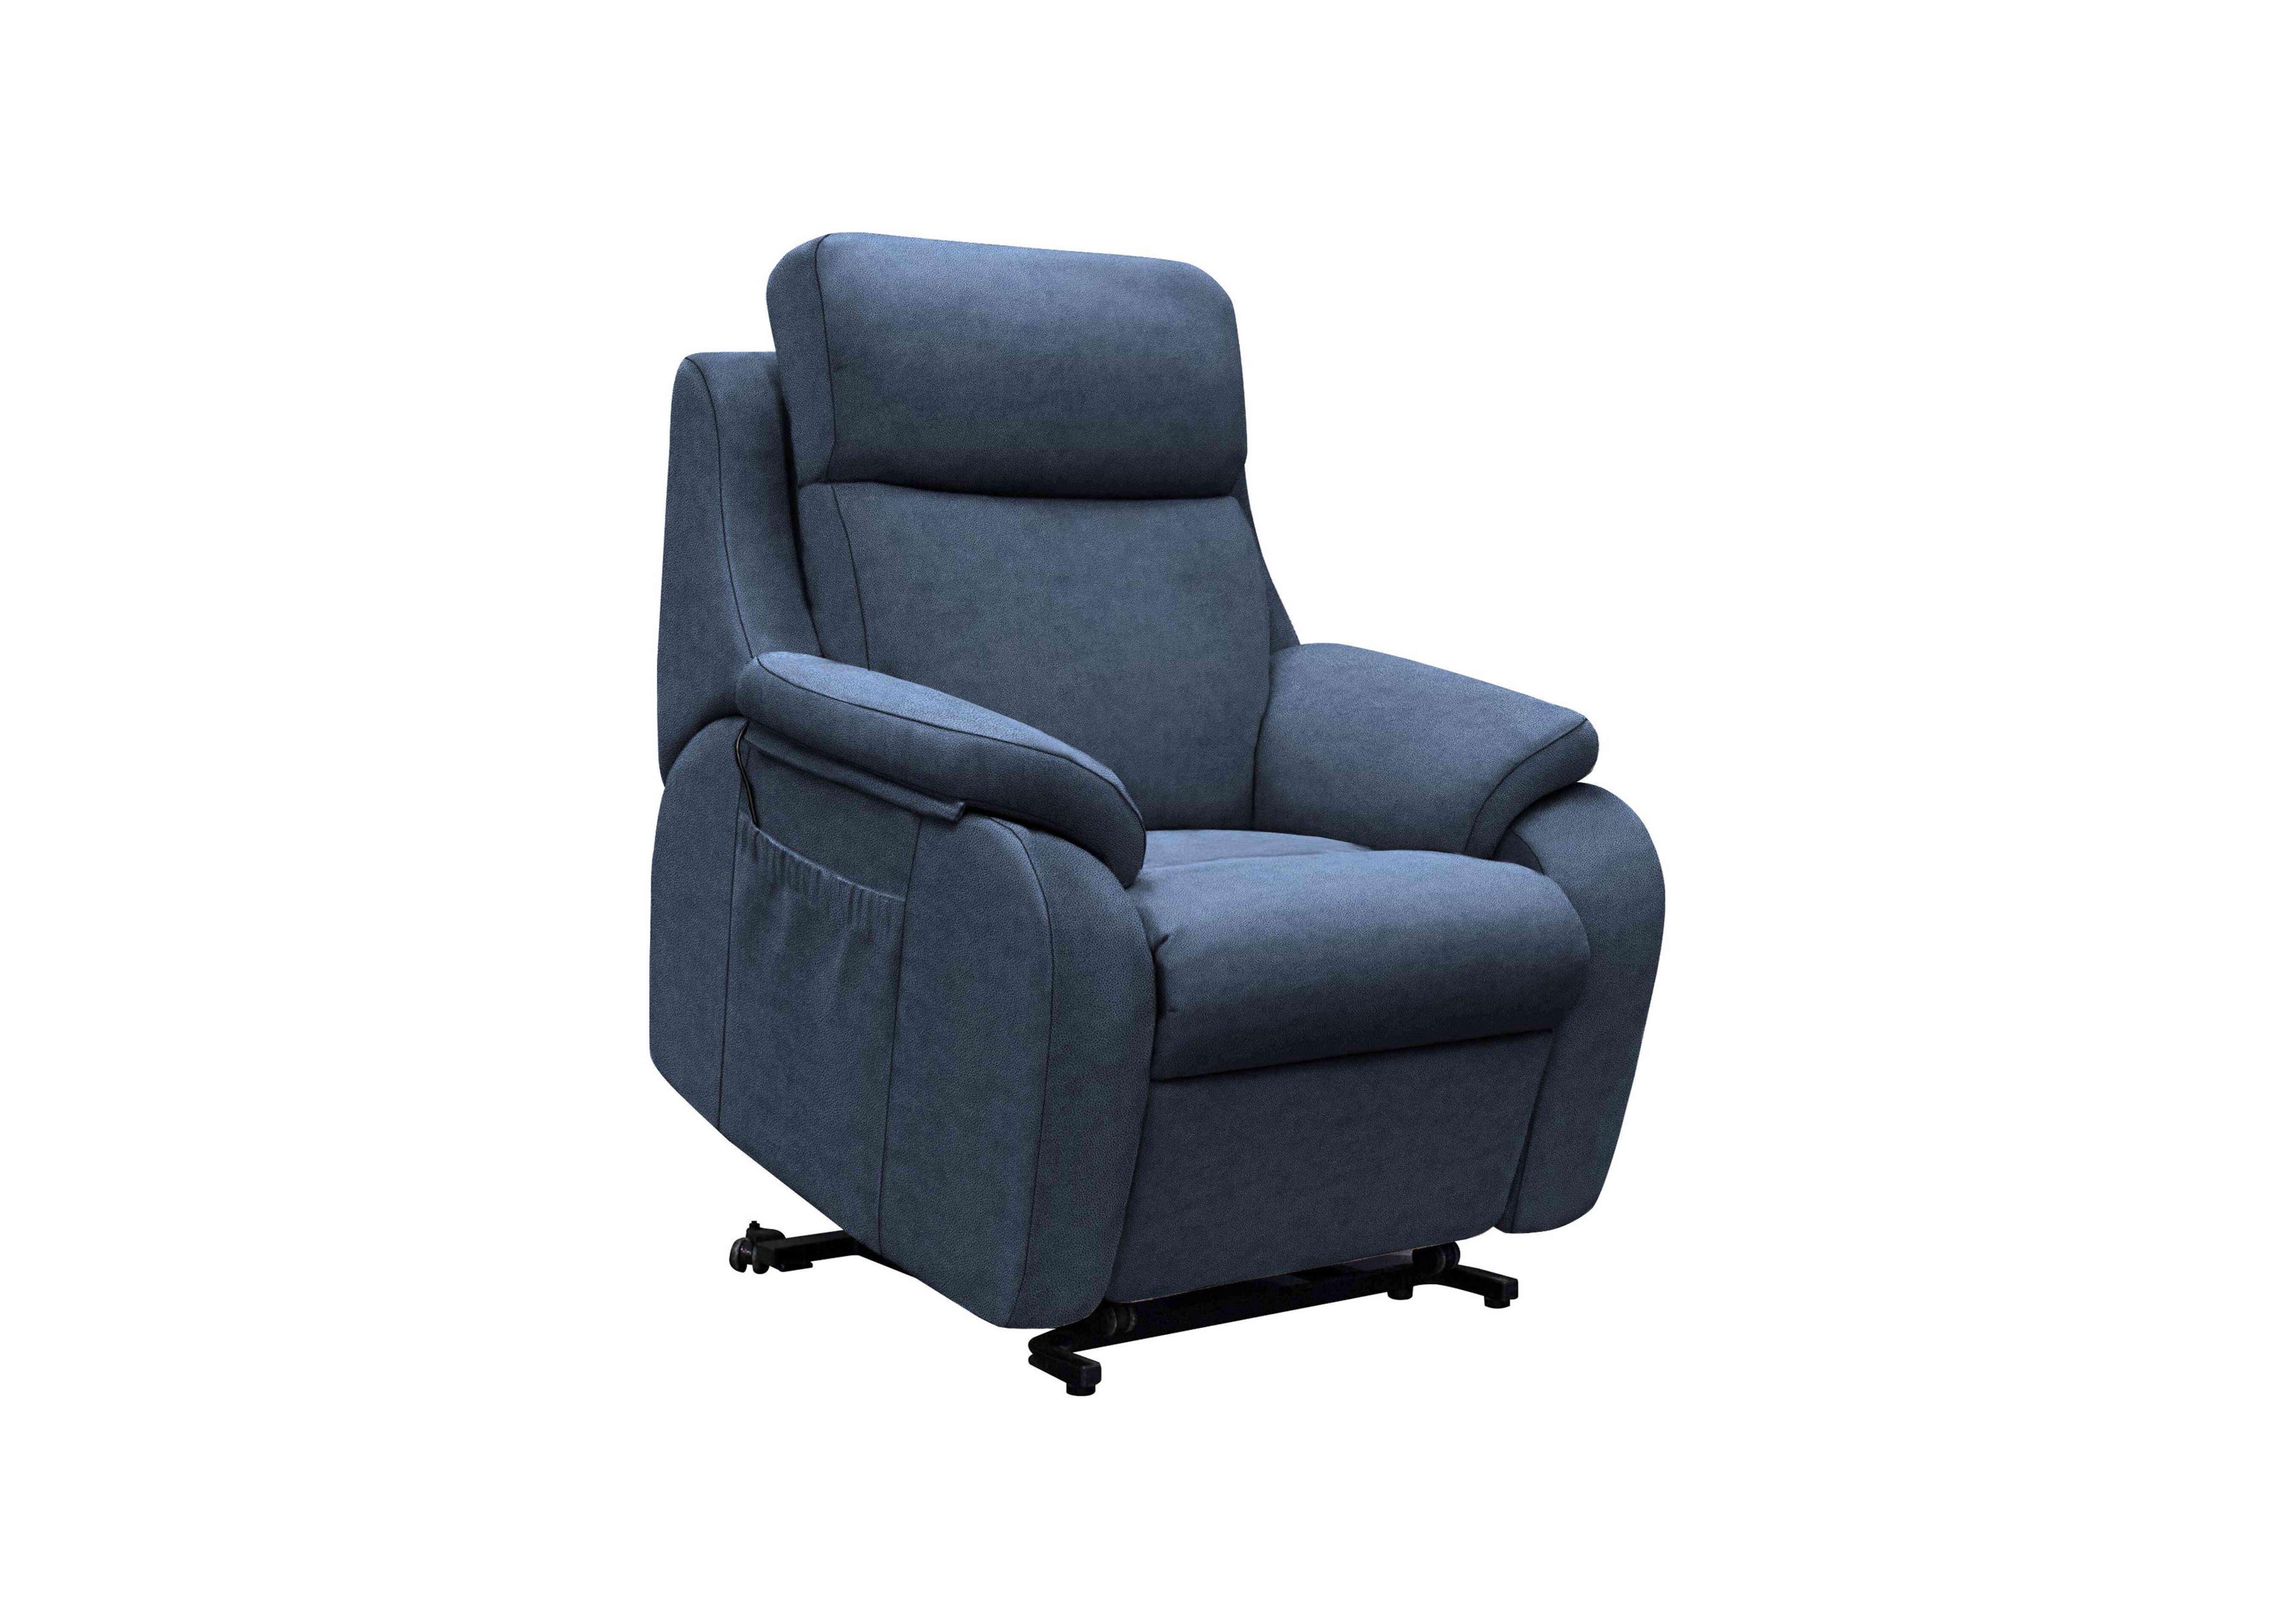 Kingsbury Large Fabric Lift and Rise Chair in A125 Stingray Indigo on Furniture Village